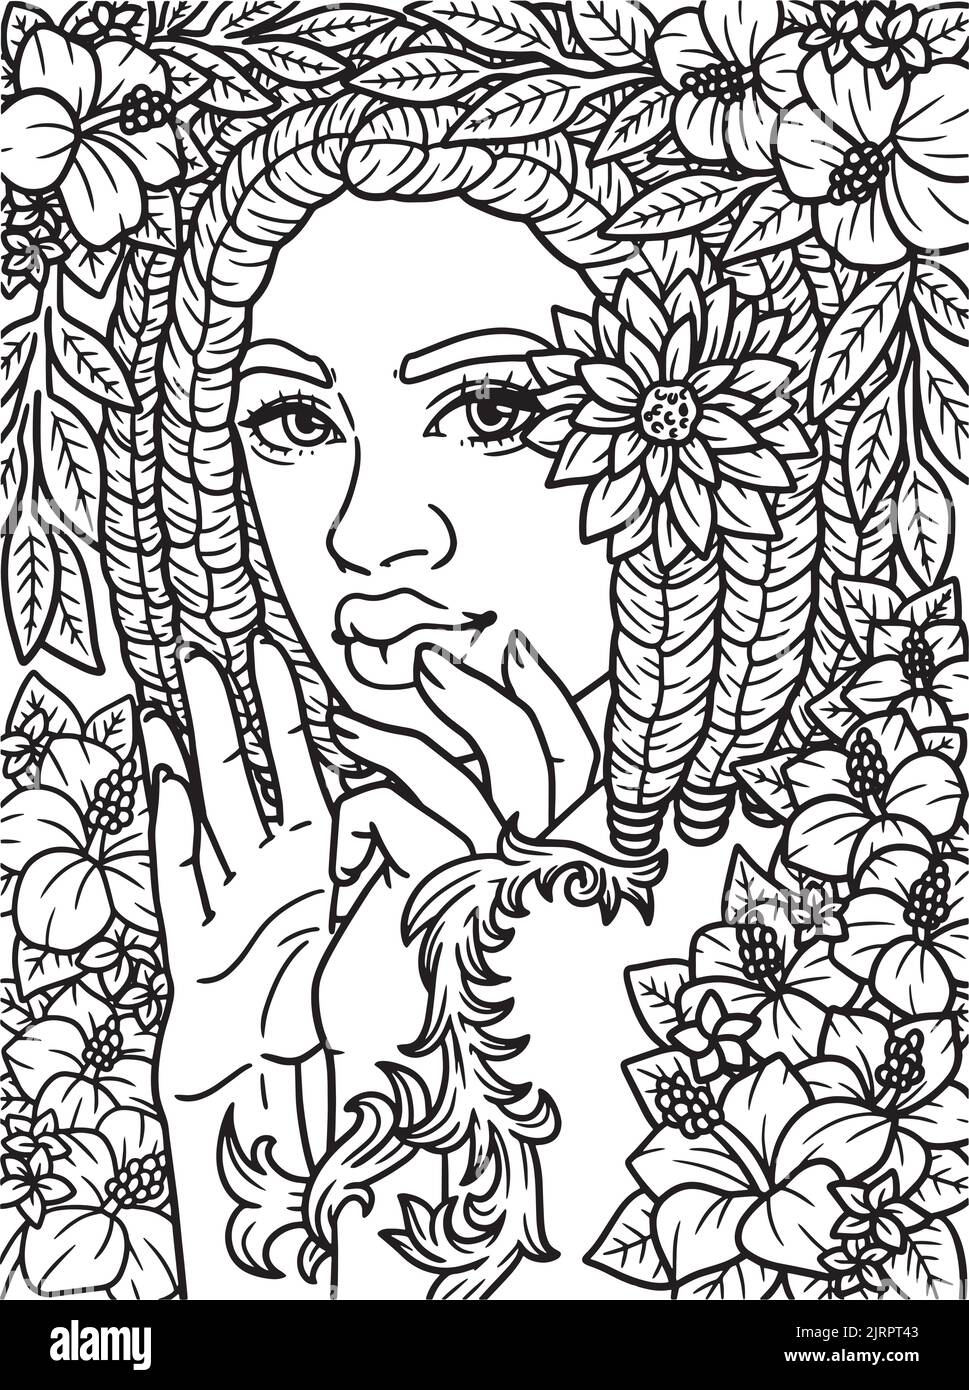 Afro American Braided Hair Coloring Page for Kids Stock Vector